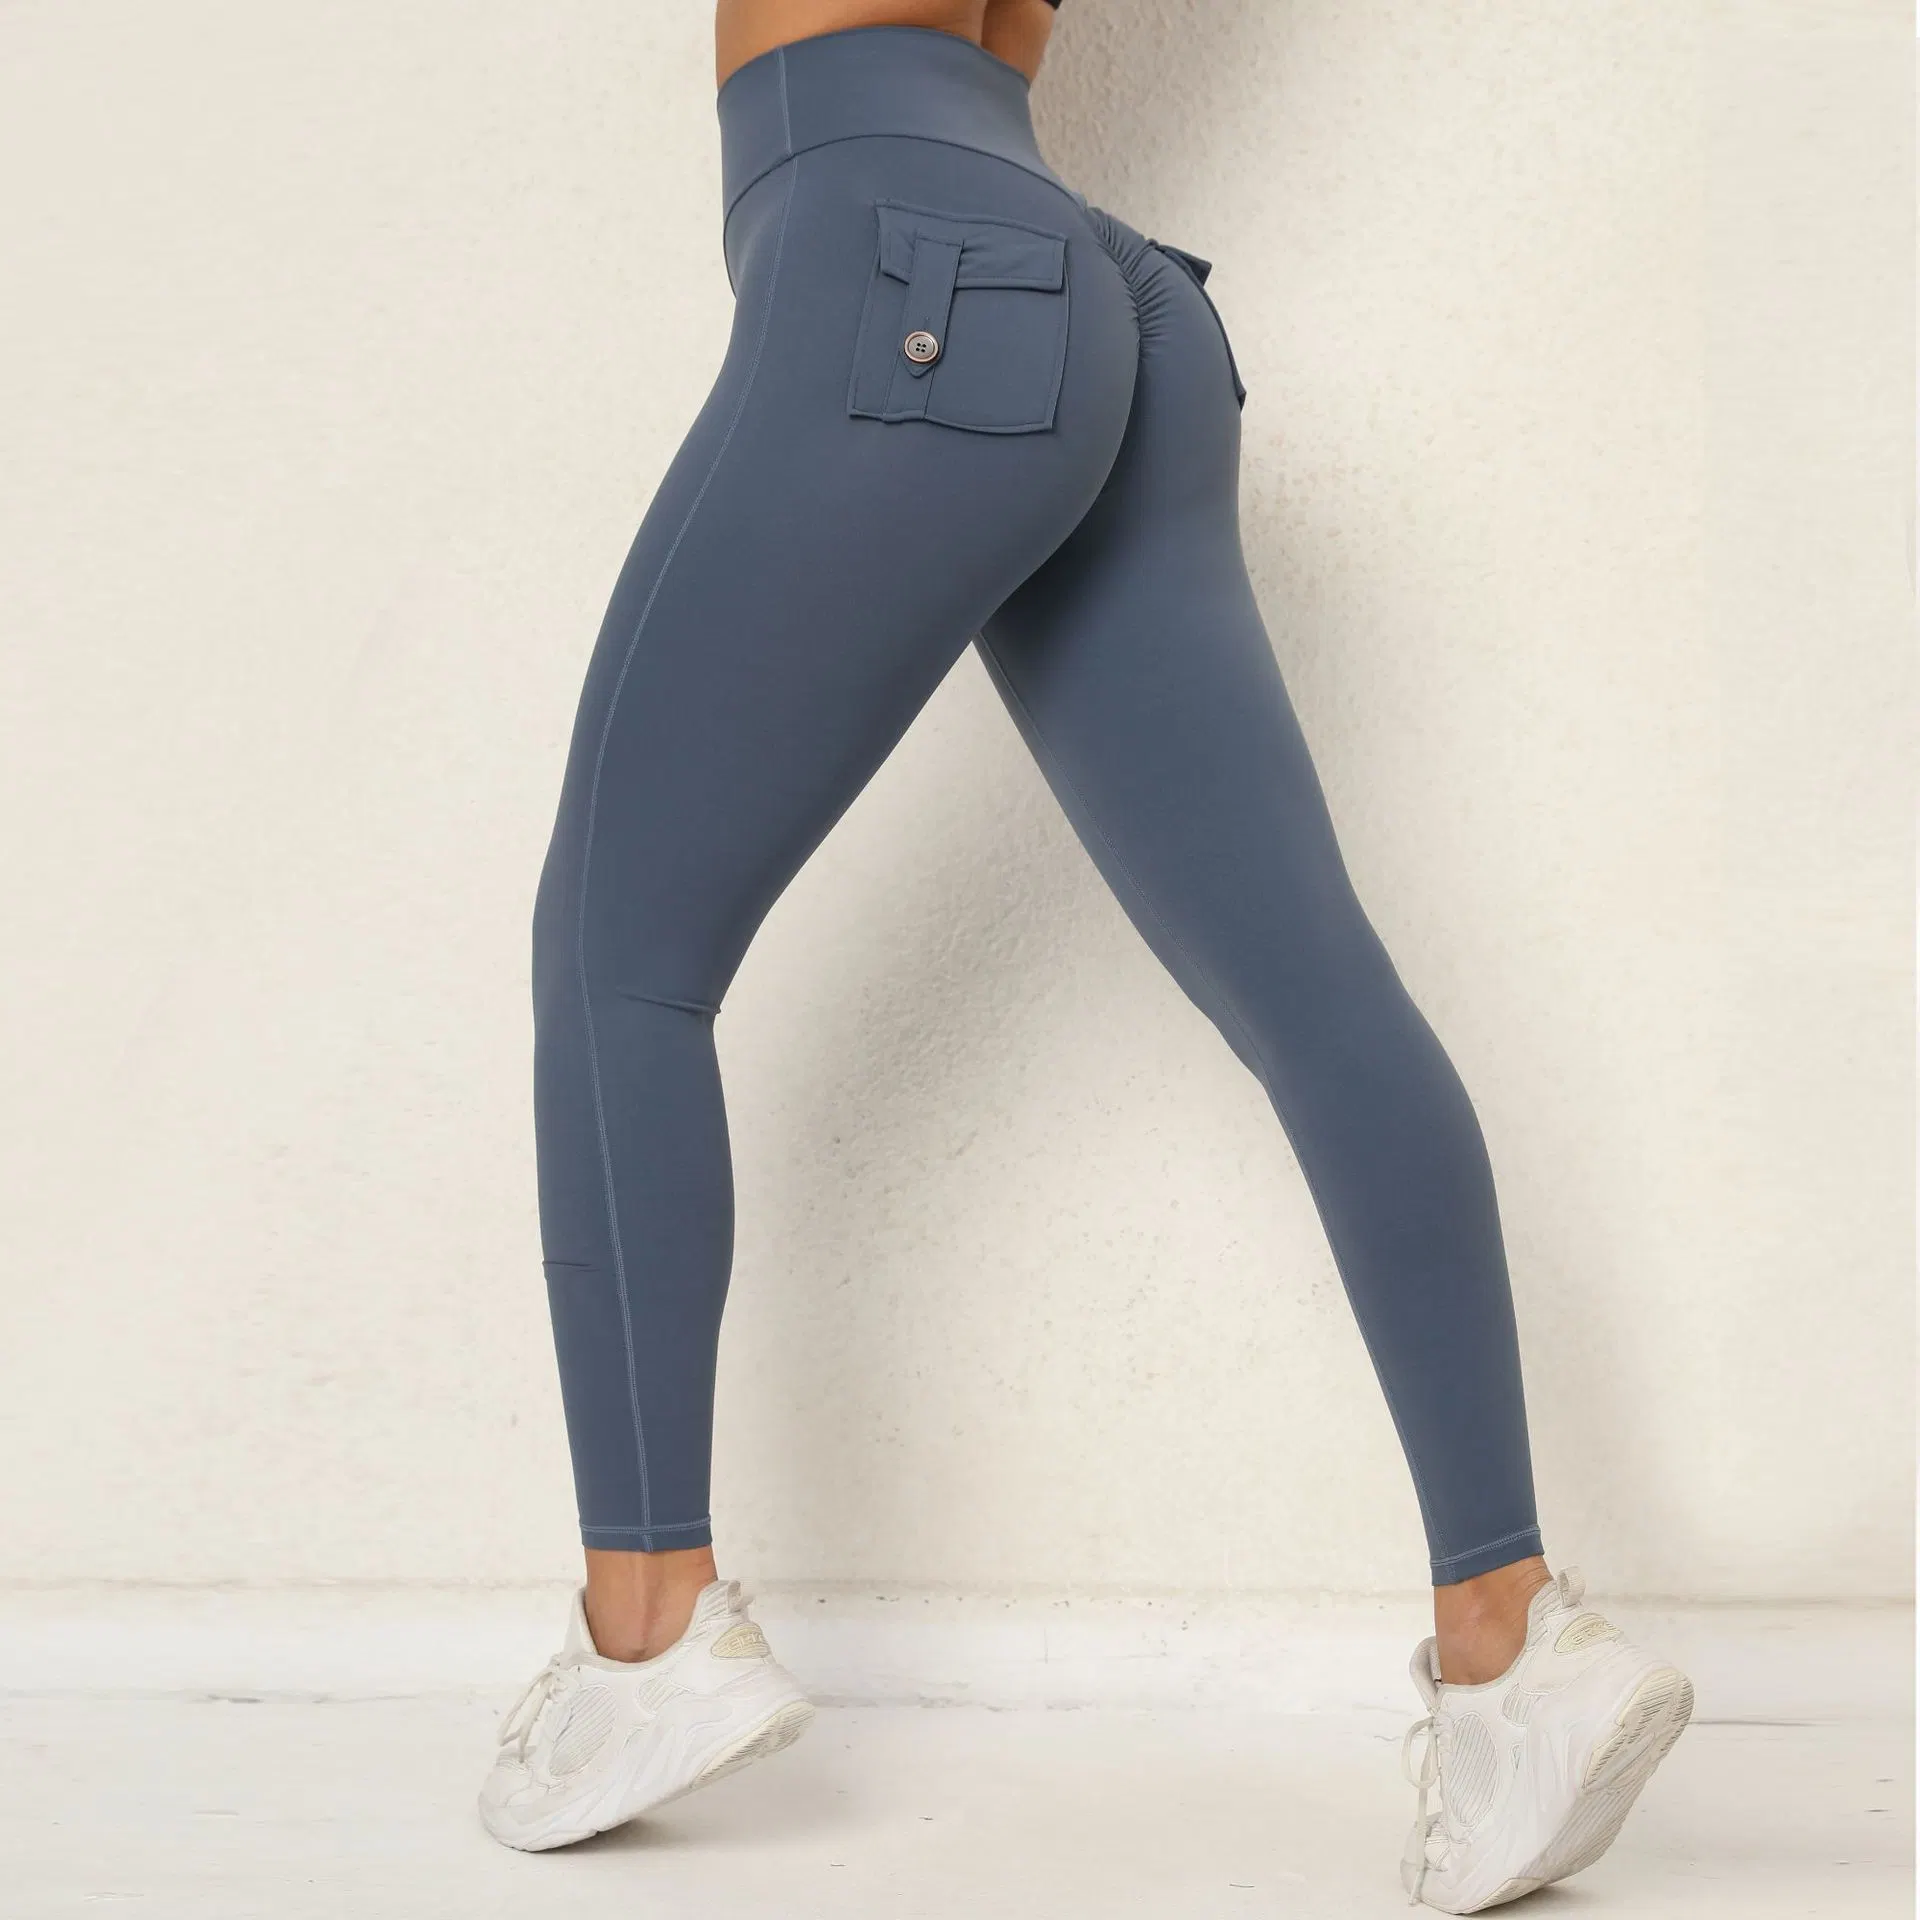 High quality/High cost performance Pmulticolor Pocket Yoga Pants High Waist Elastic Buttock Lifting Buttons Lady Tracksuit Trousers Multicolor Leggings QS0250